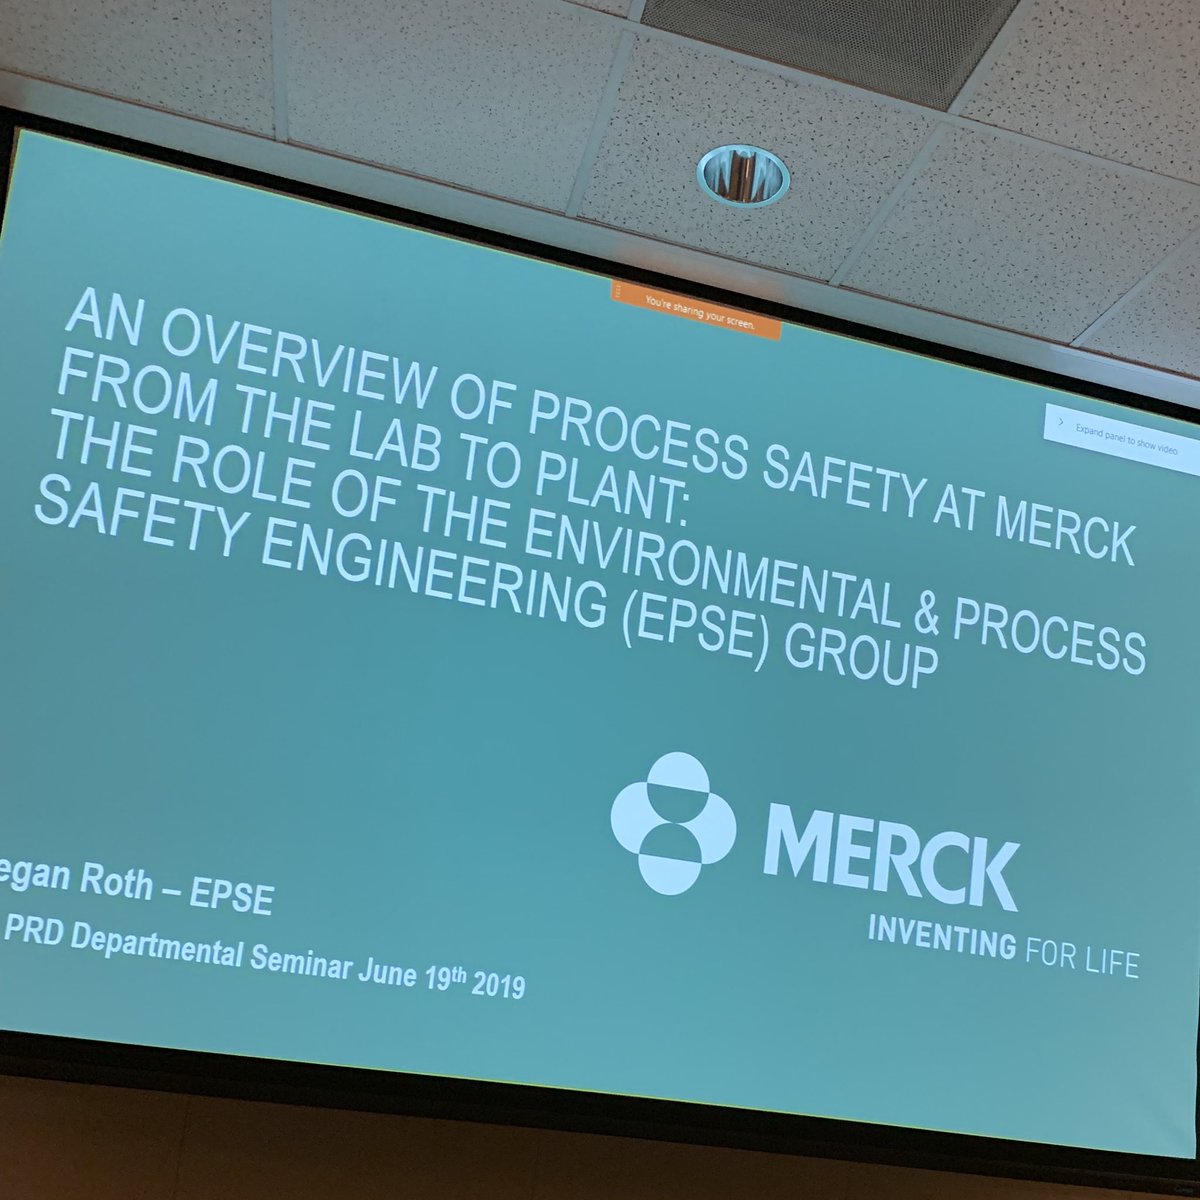 Time for some #ProcessSafety. #ContinuousEducation #MerckChemistry